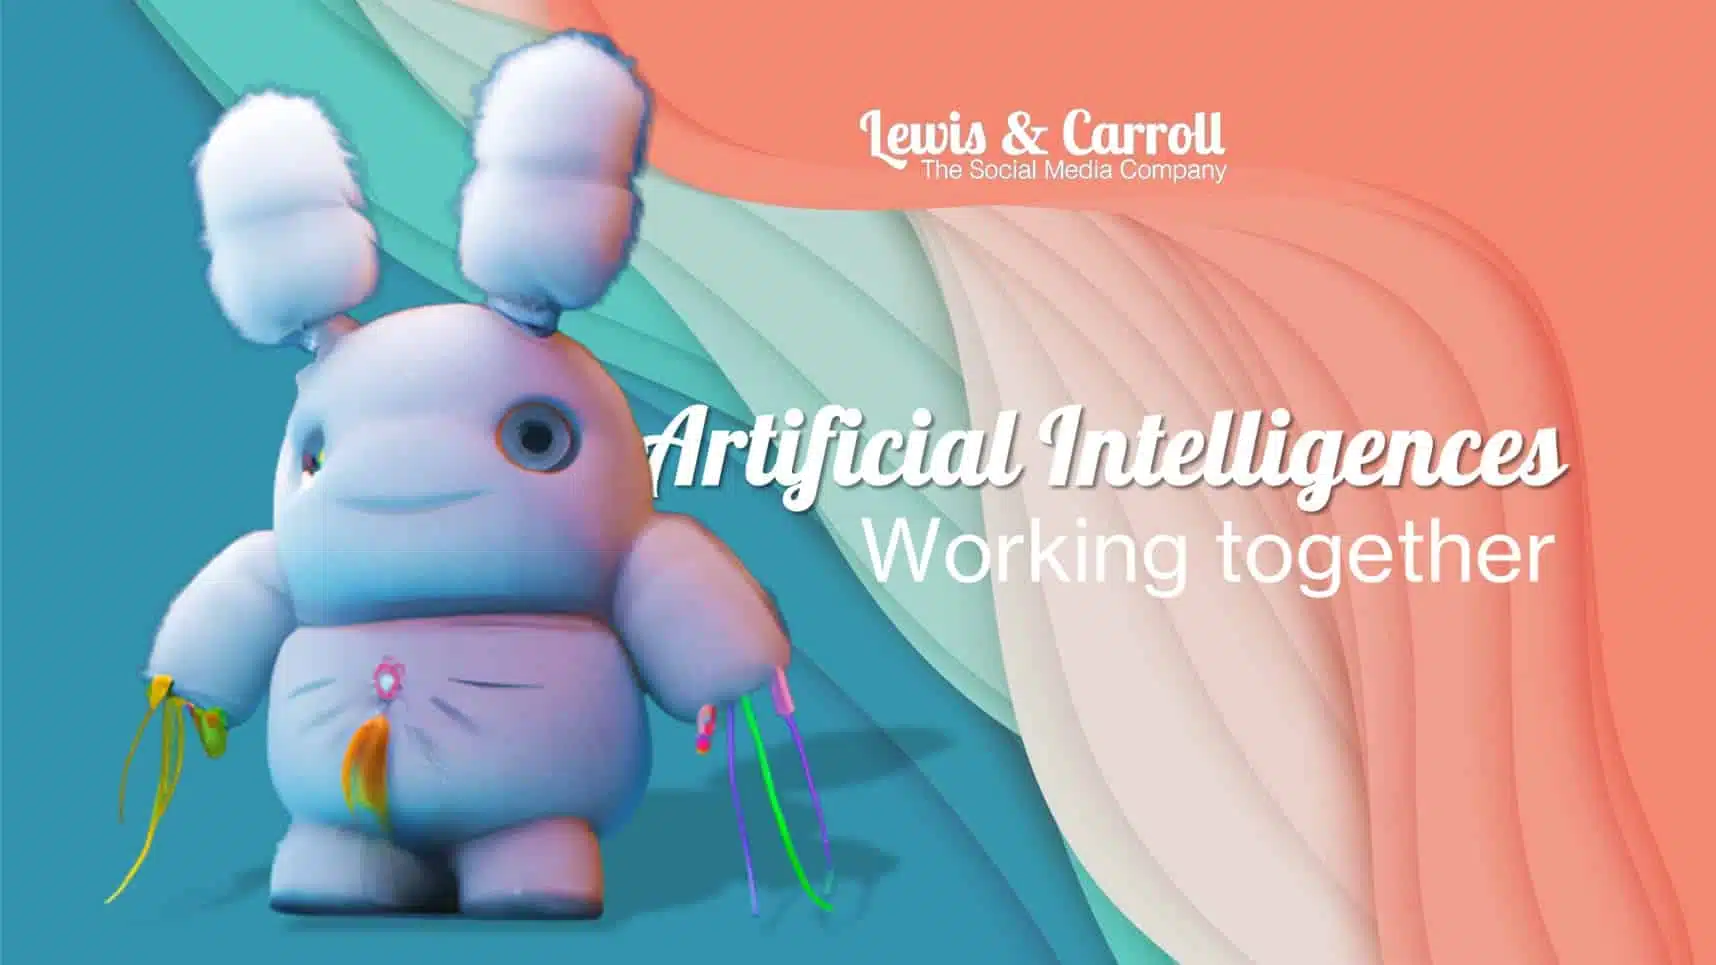 Artificial Intelligence working with Lewis & Carroll team